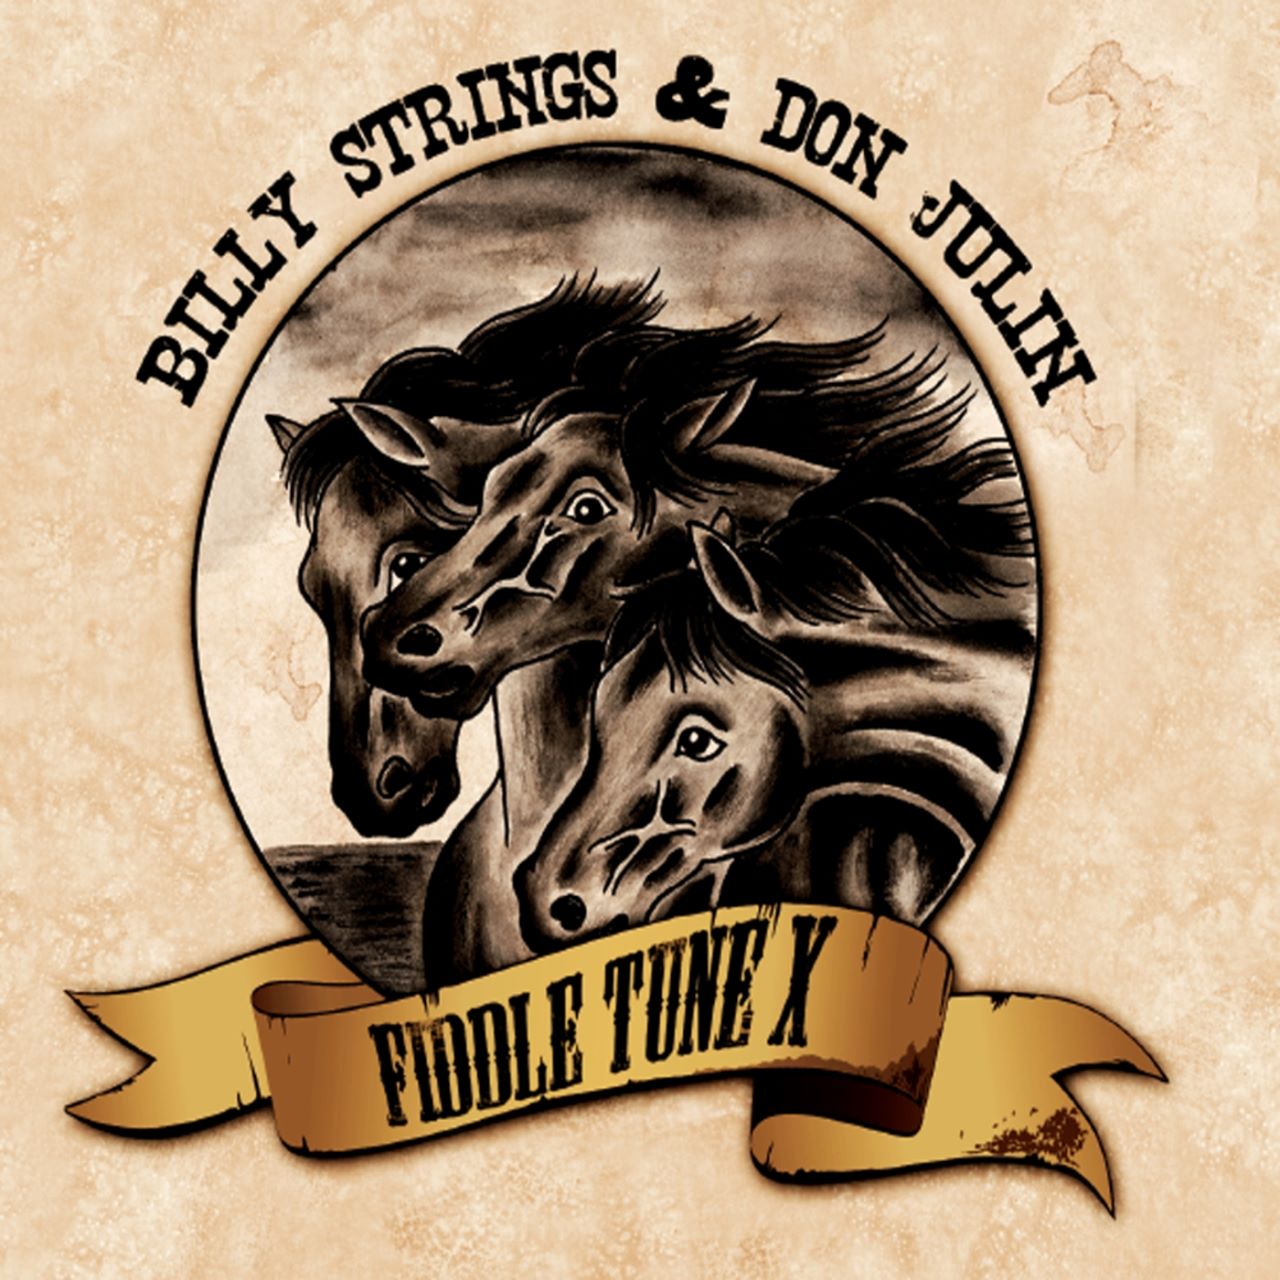 Billy Strings & Don Julin - Fiddle Tune X cover album